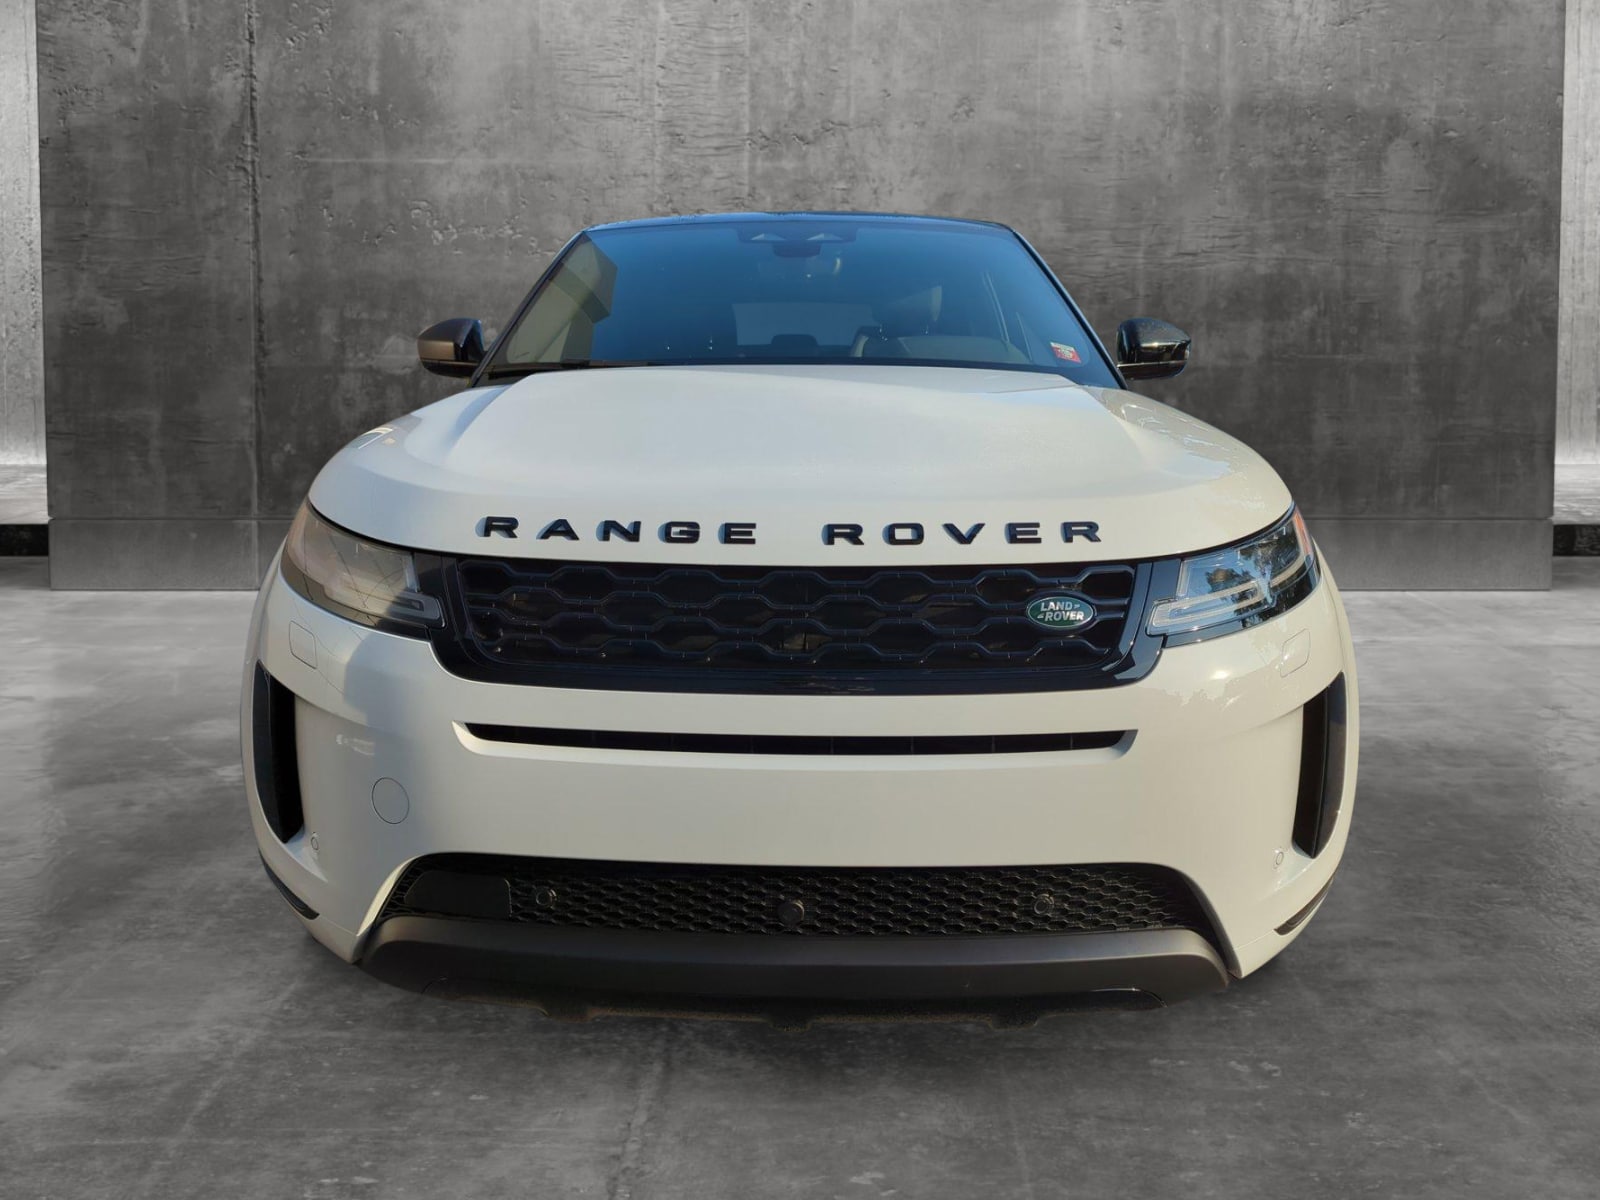 New Inventory  New Range Rover, Defender, and Discovery for Sale Near Me  Elmsford, NY